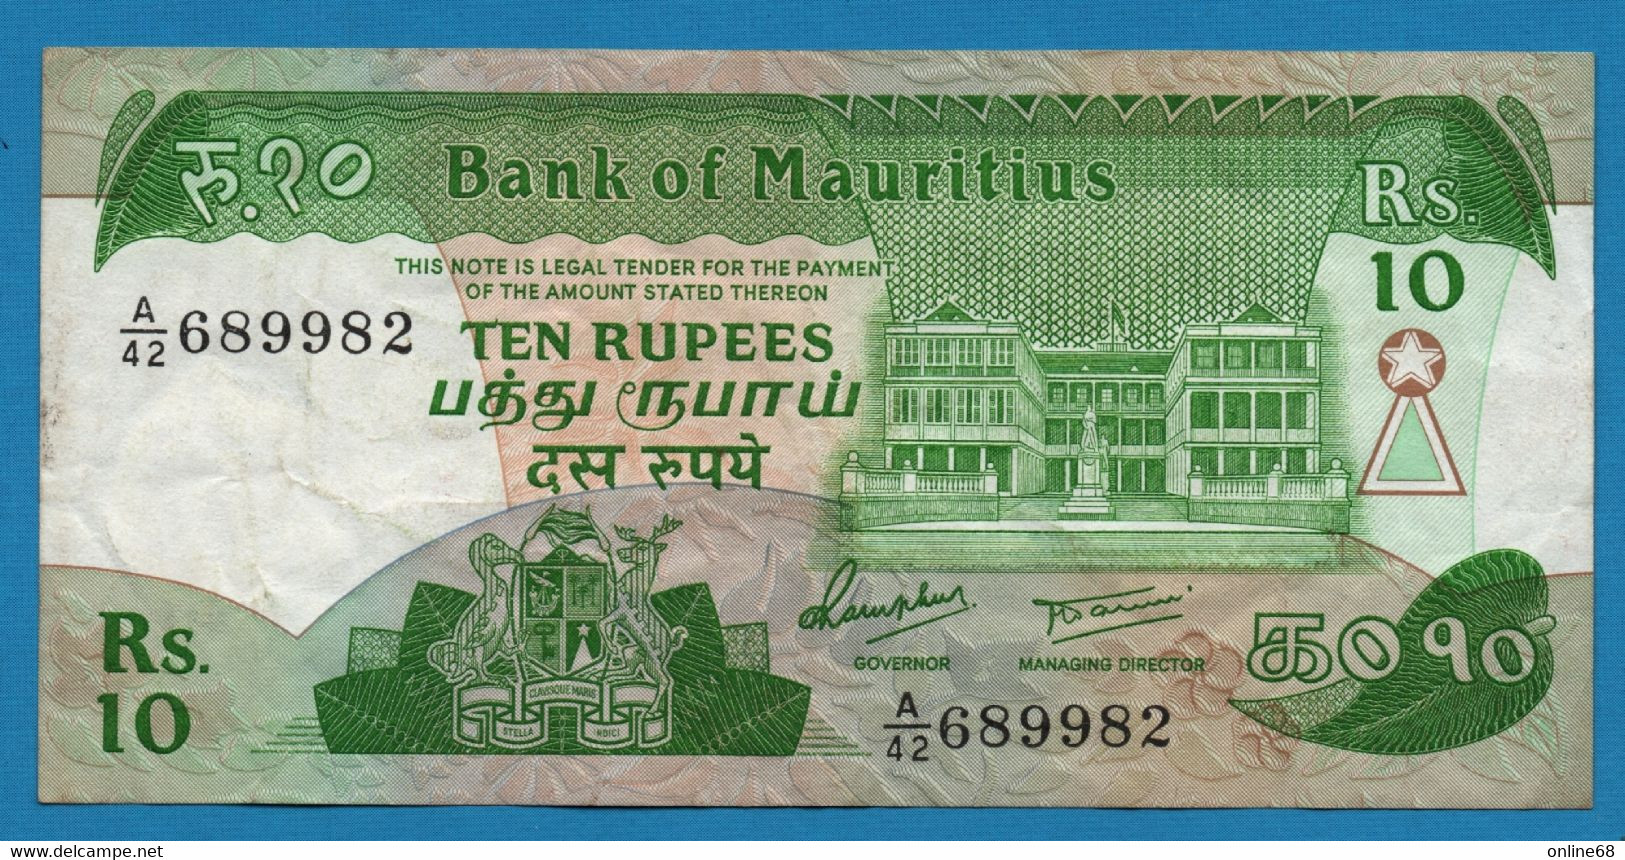 MAURITIUS 10 RUPEES ND (1985) # A/42 689982 P# 35 Government Building - Mauritius